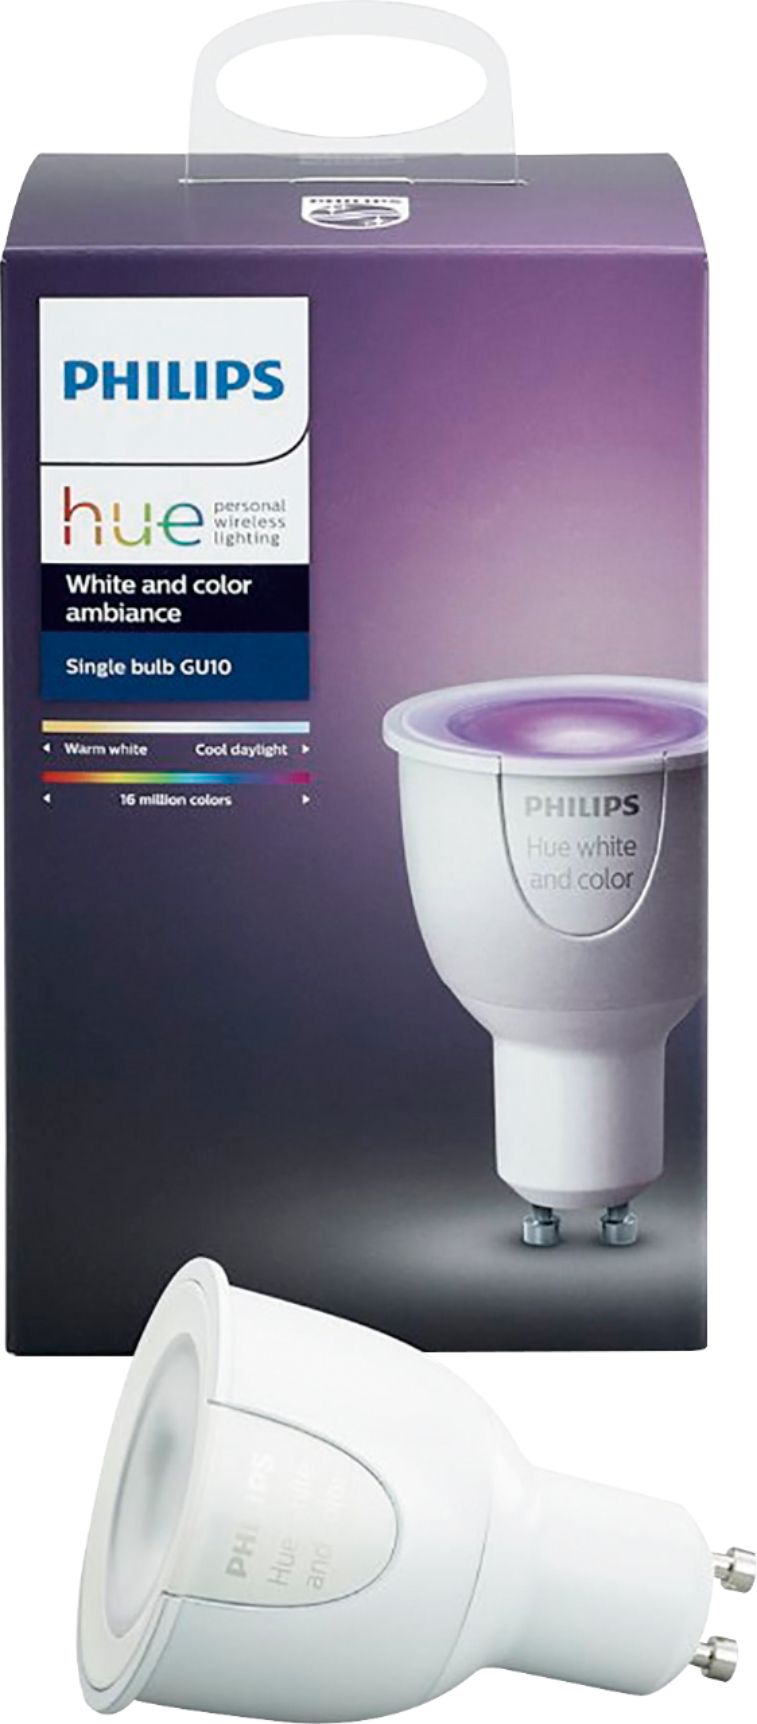 Philips Hue White & Color LED Smart GU10 Bulb Works with Alexa & Google Assistant Hue Hub Optional Bluetooth & Zigbee compatible A Certified for Humans Device